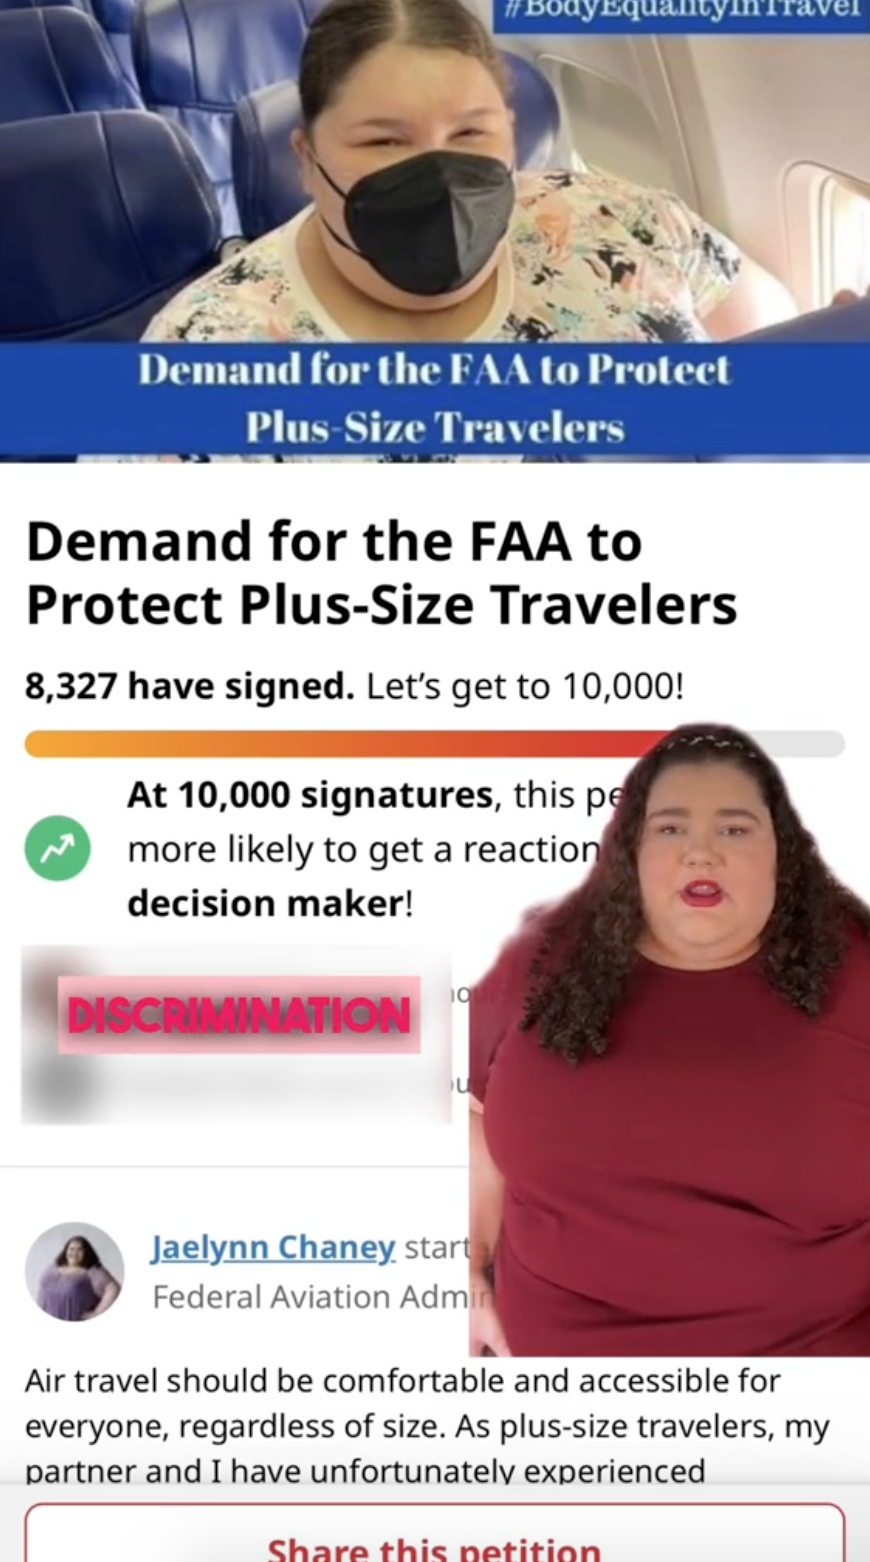 Influencer feels plus-size passengers should be given as many